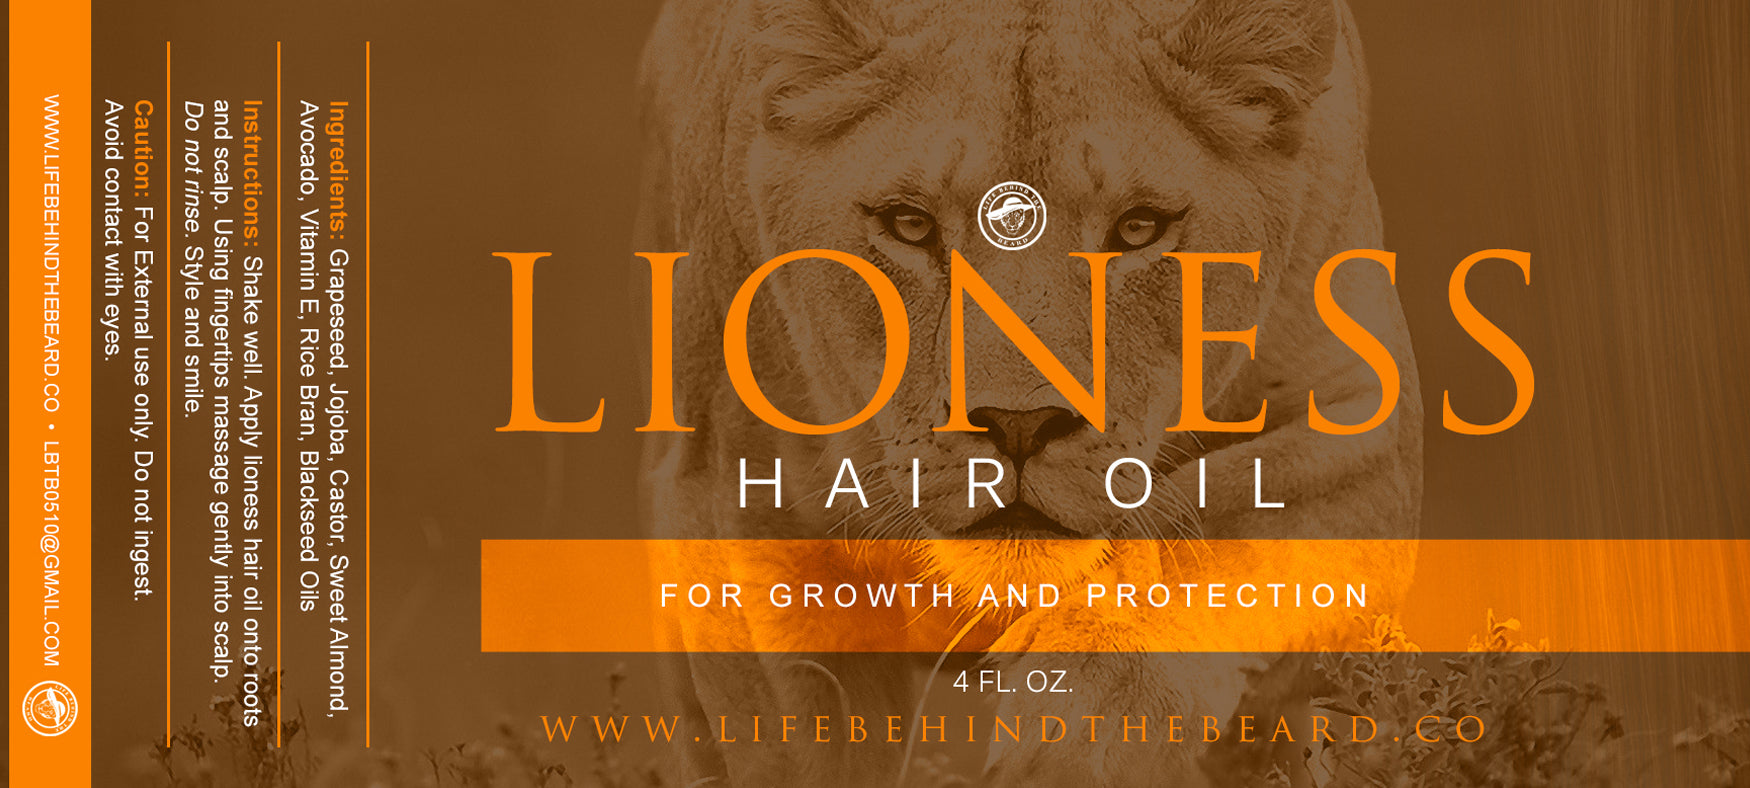 Lioness Hair Oil for Women